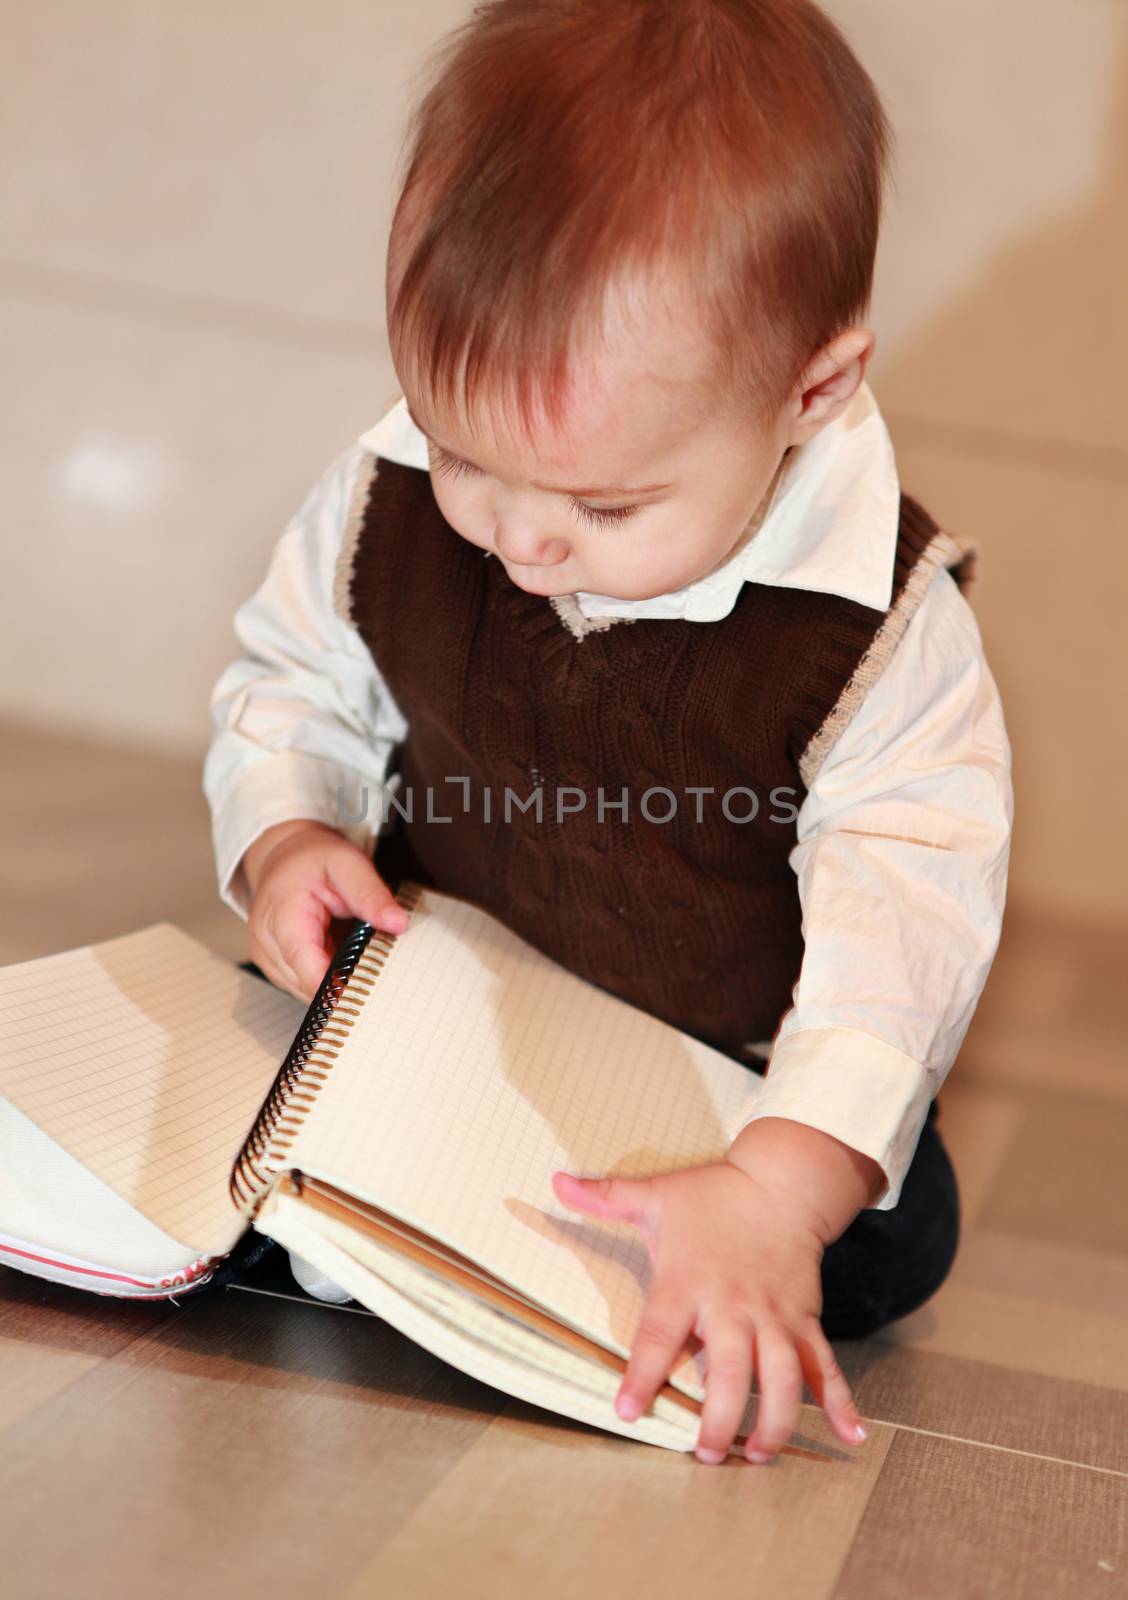 little boy studies a notebook by ssuaphoto